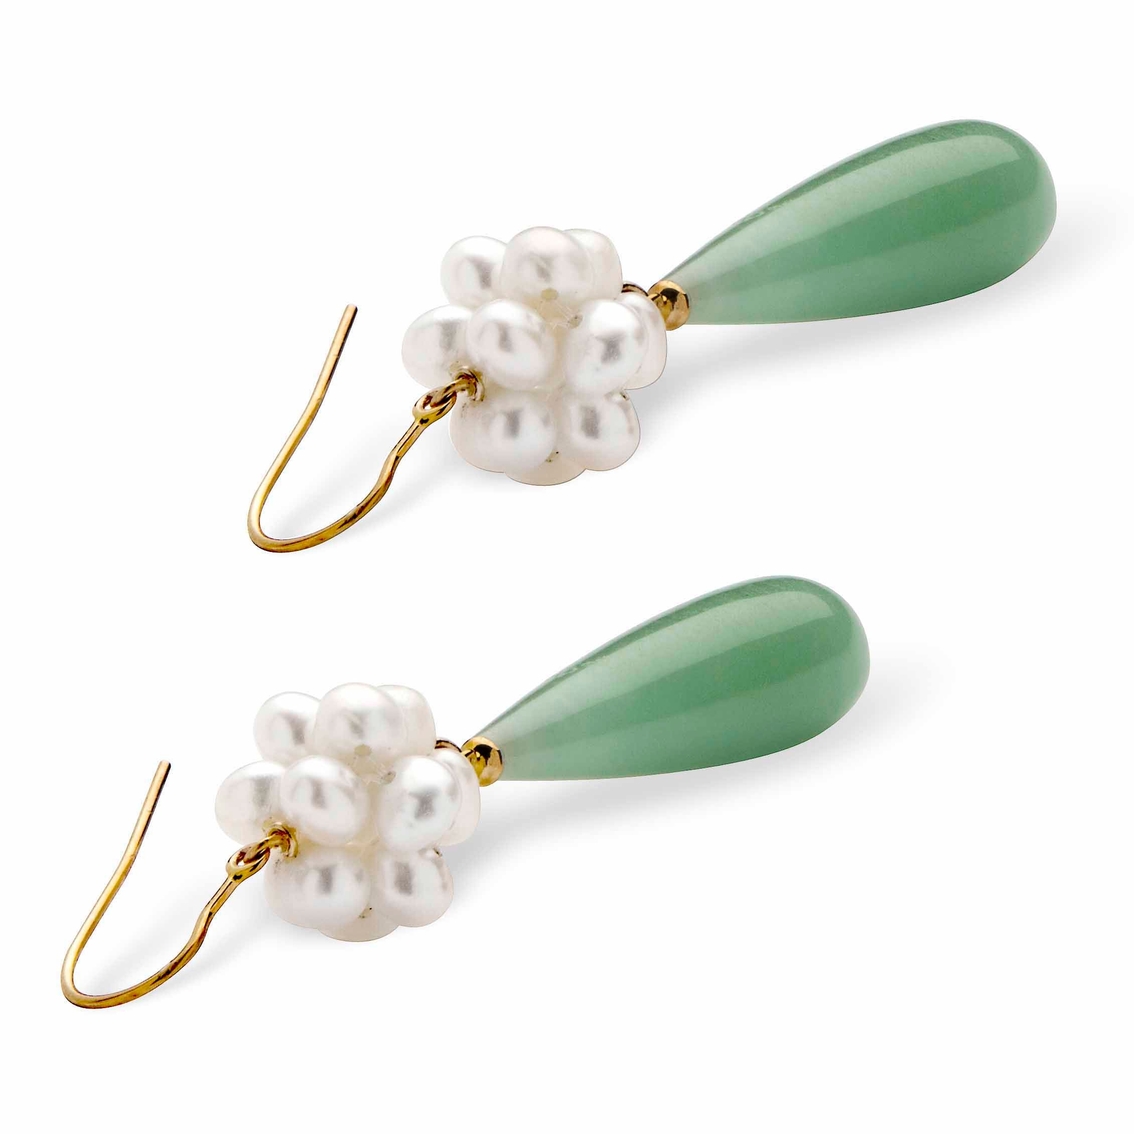 Jade and Cultured Freshwater Pearl Accent 10k Yellow Gold Drop Earrings - Image 2 of 4